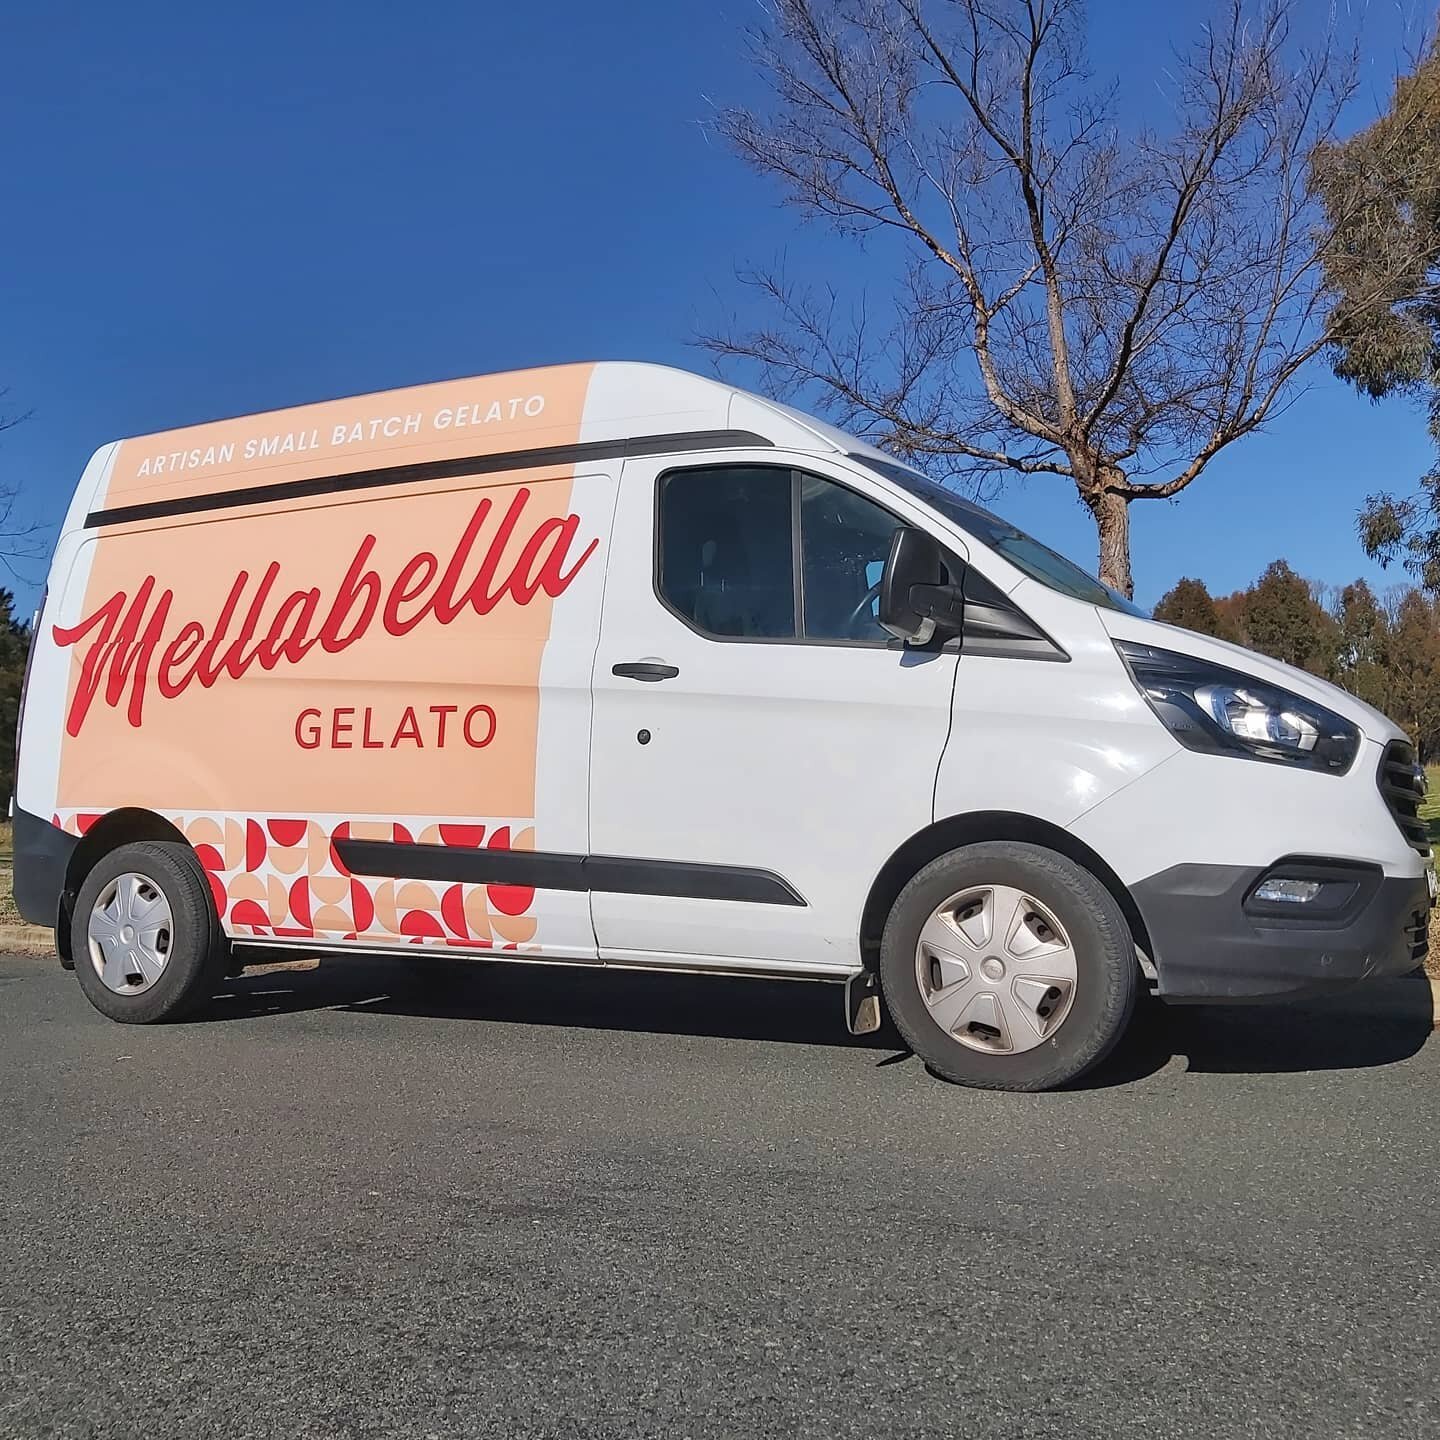 People often ask how we get our carts around town? 

Well the cats out of the bag... we don't have to ride a bike anywhere because we have Mellabella's awesome little delivery van!

She's now looking better than ever with a fancy new wrap!

Thanks to